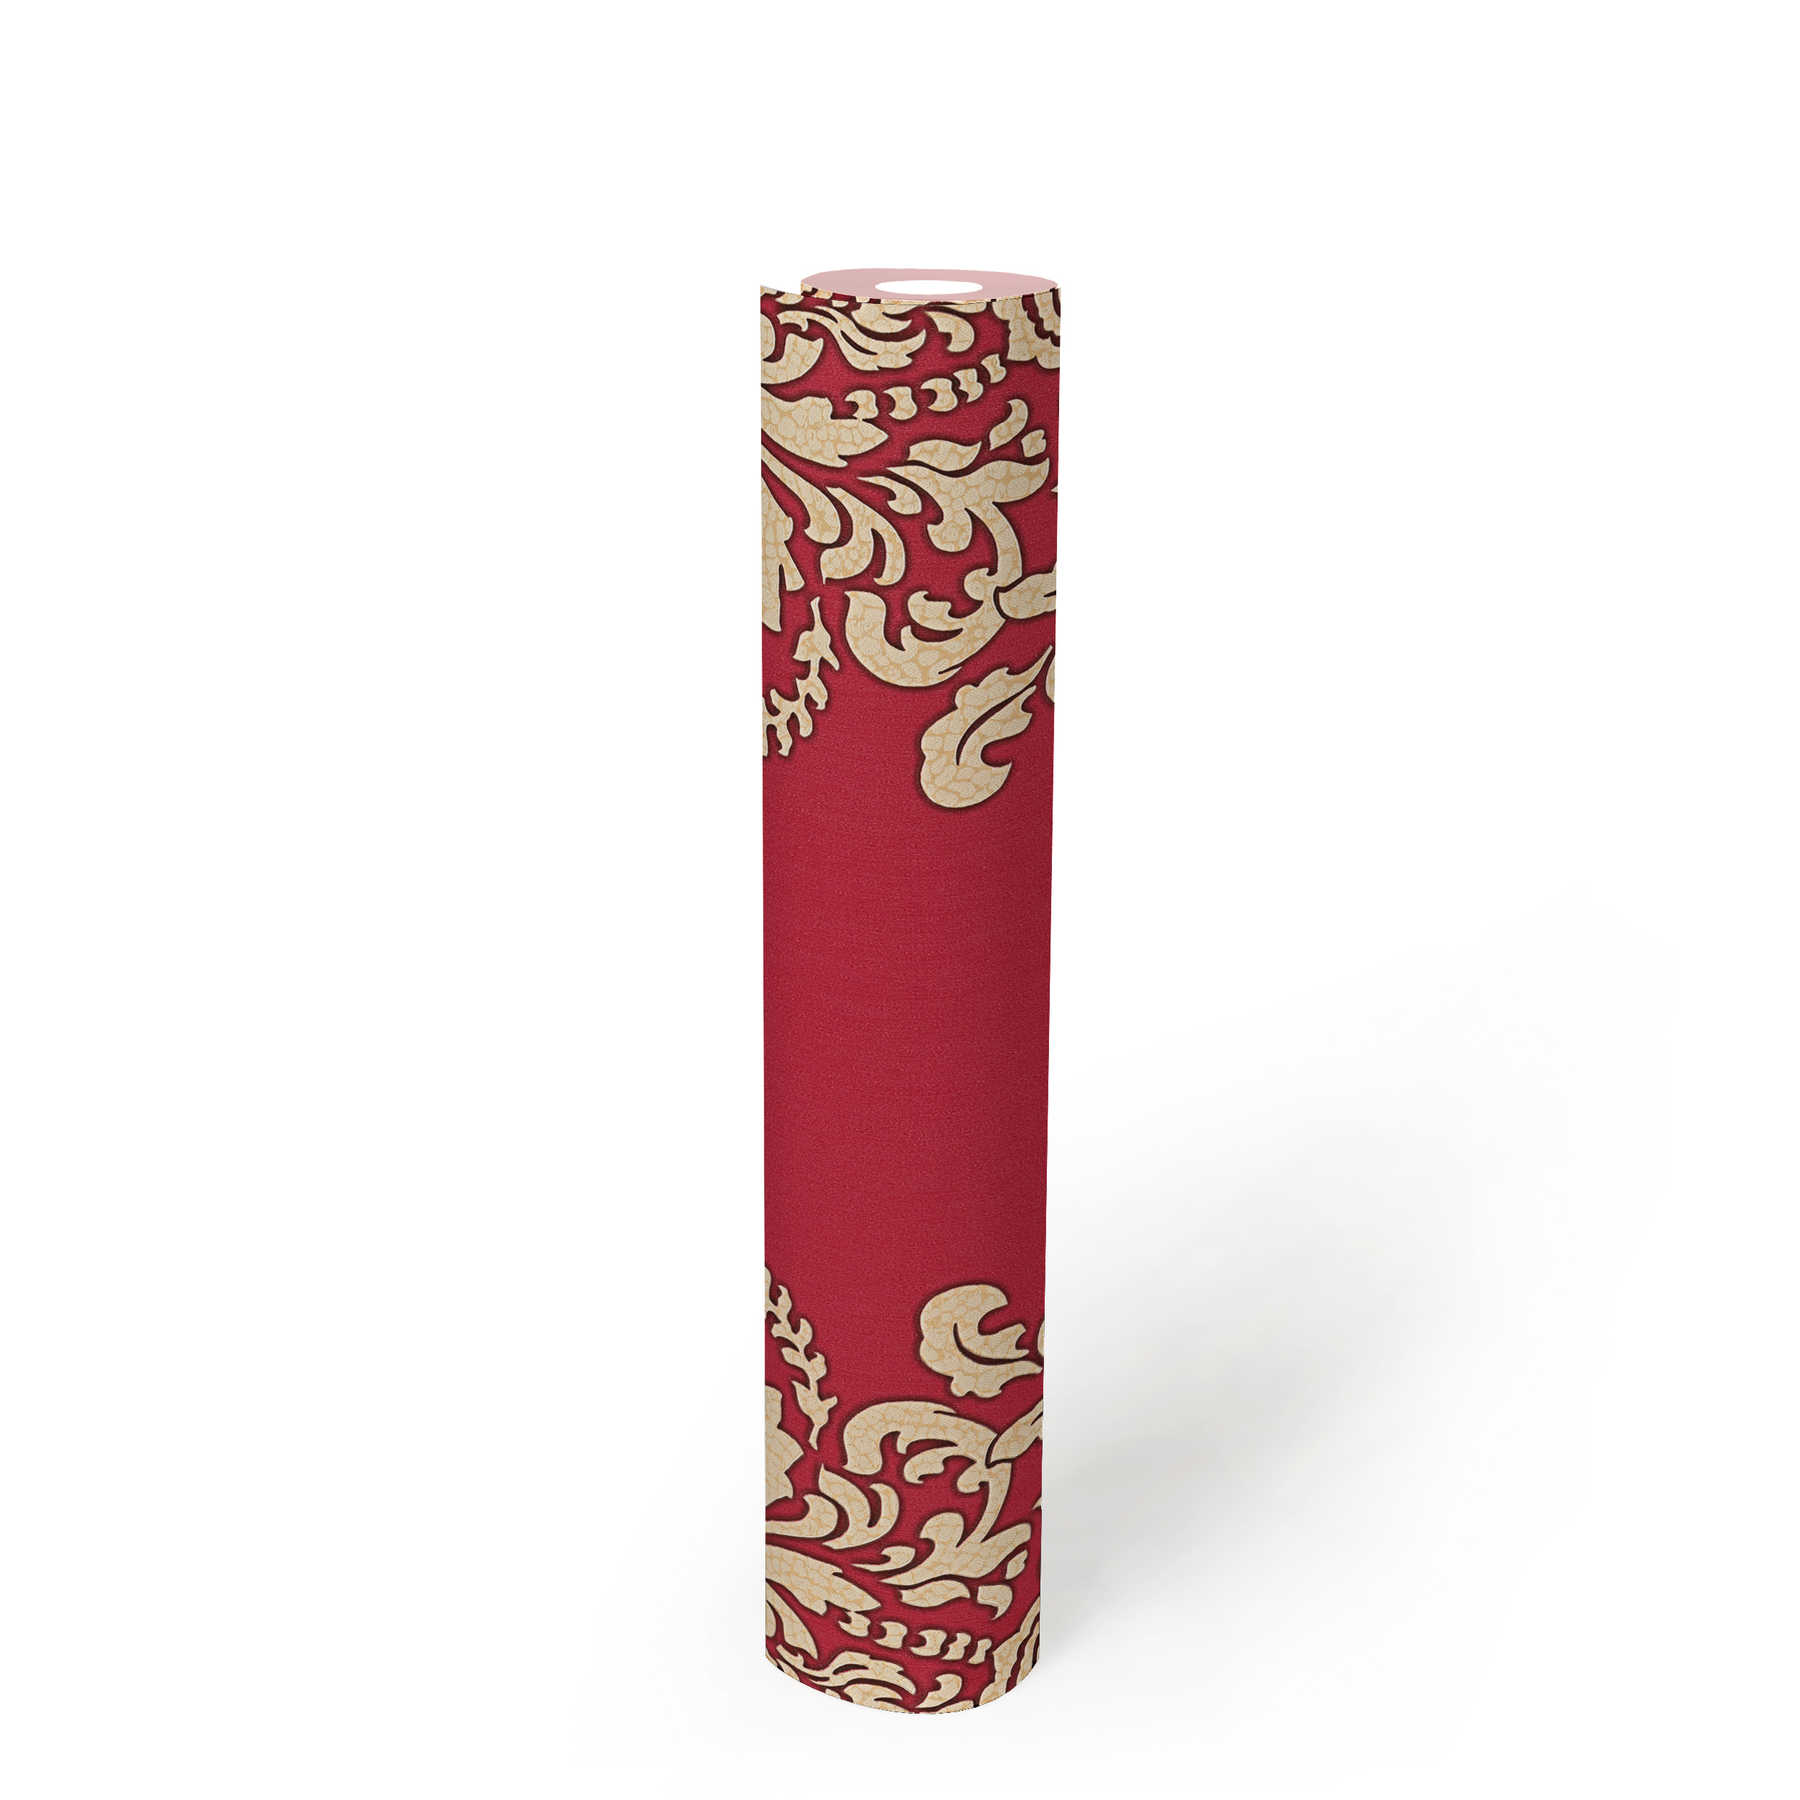             Ornament wallpaper with crackle effect - beige, red
        